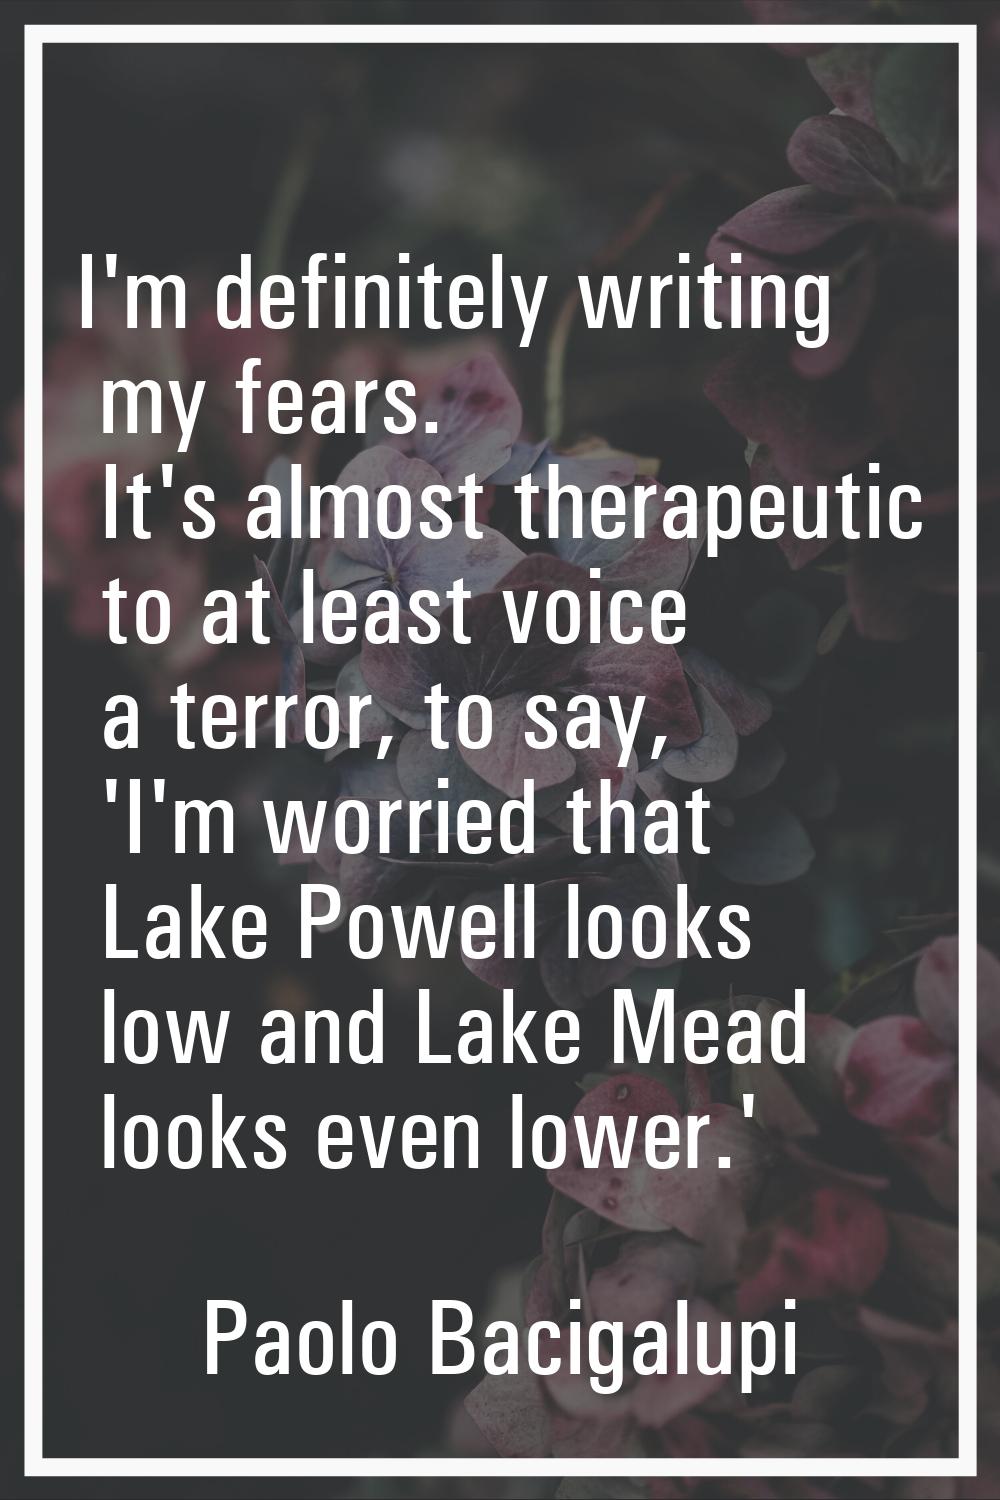 I'm definitely writing my fears. It's almost therapeutic to at least voice a terror, to say, 'I'm w